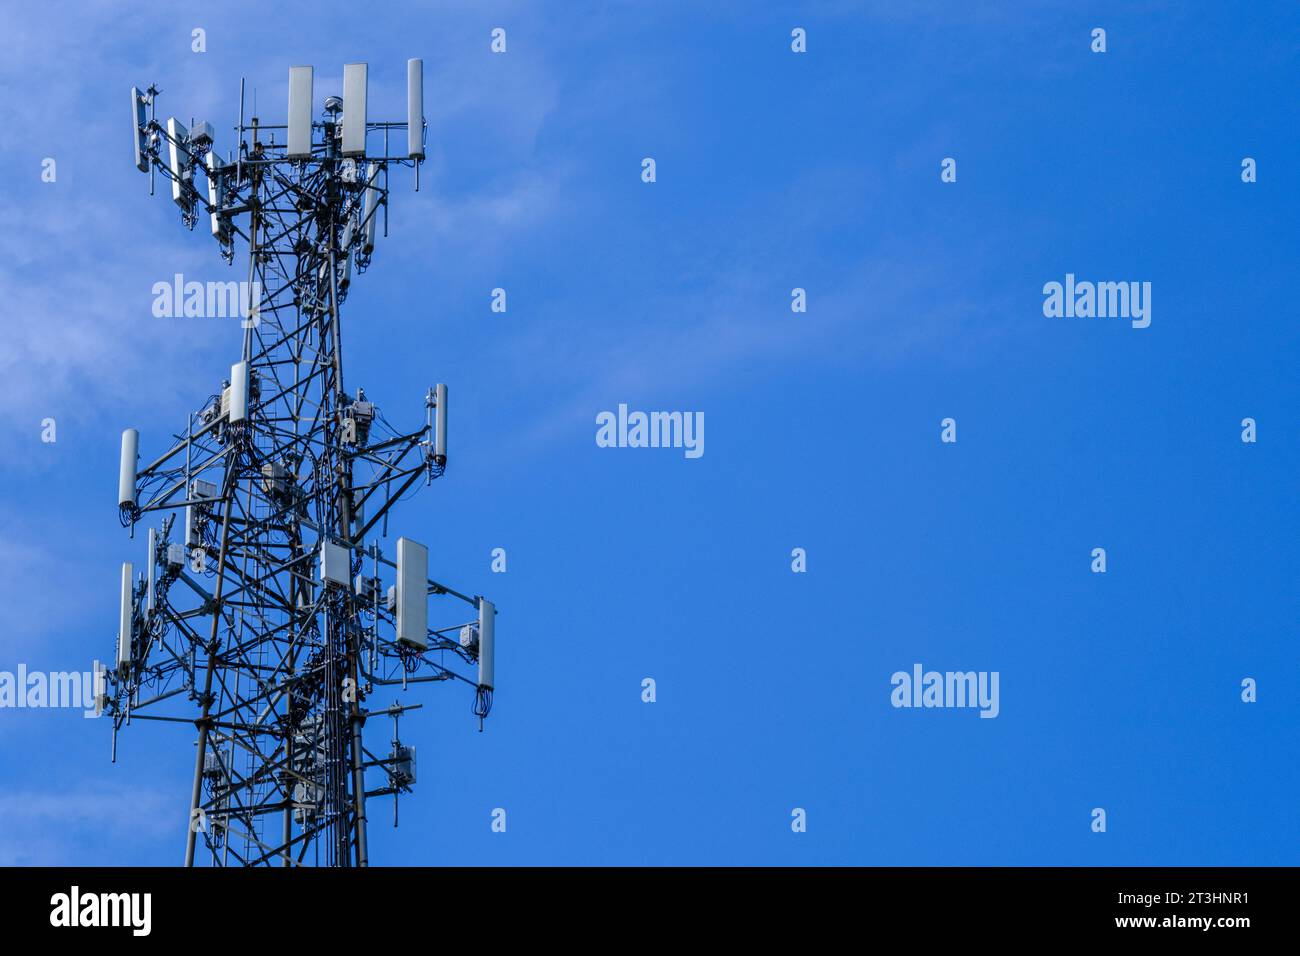 A photograph of the top portion of a cellular antenna tower against a blue sky with copy space. Stock Photo